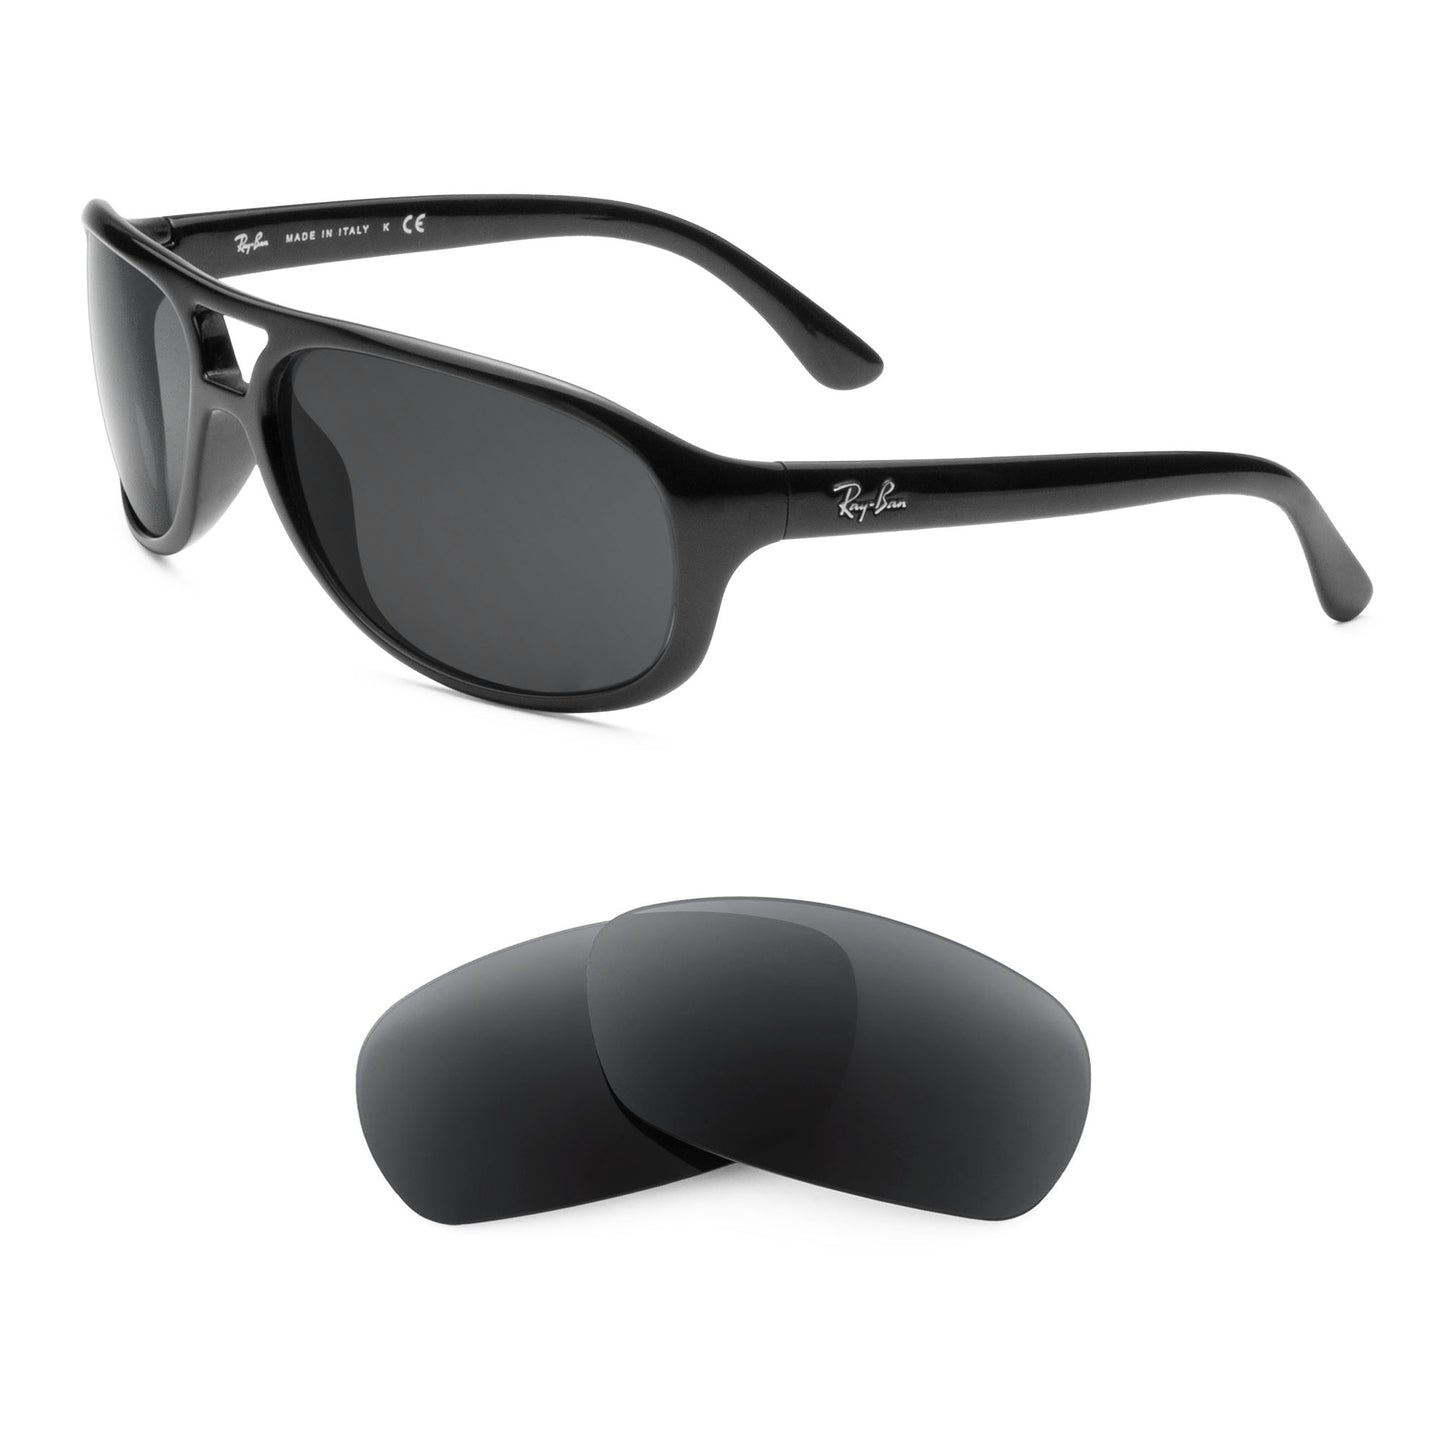 Ray-Ban RB4124 63mm sunglasses with replacement lenses